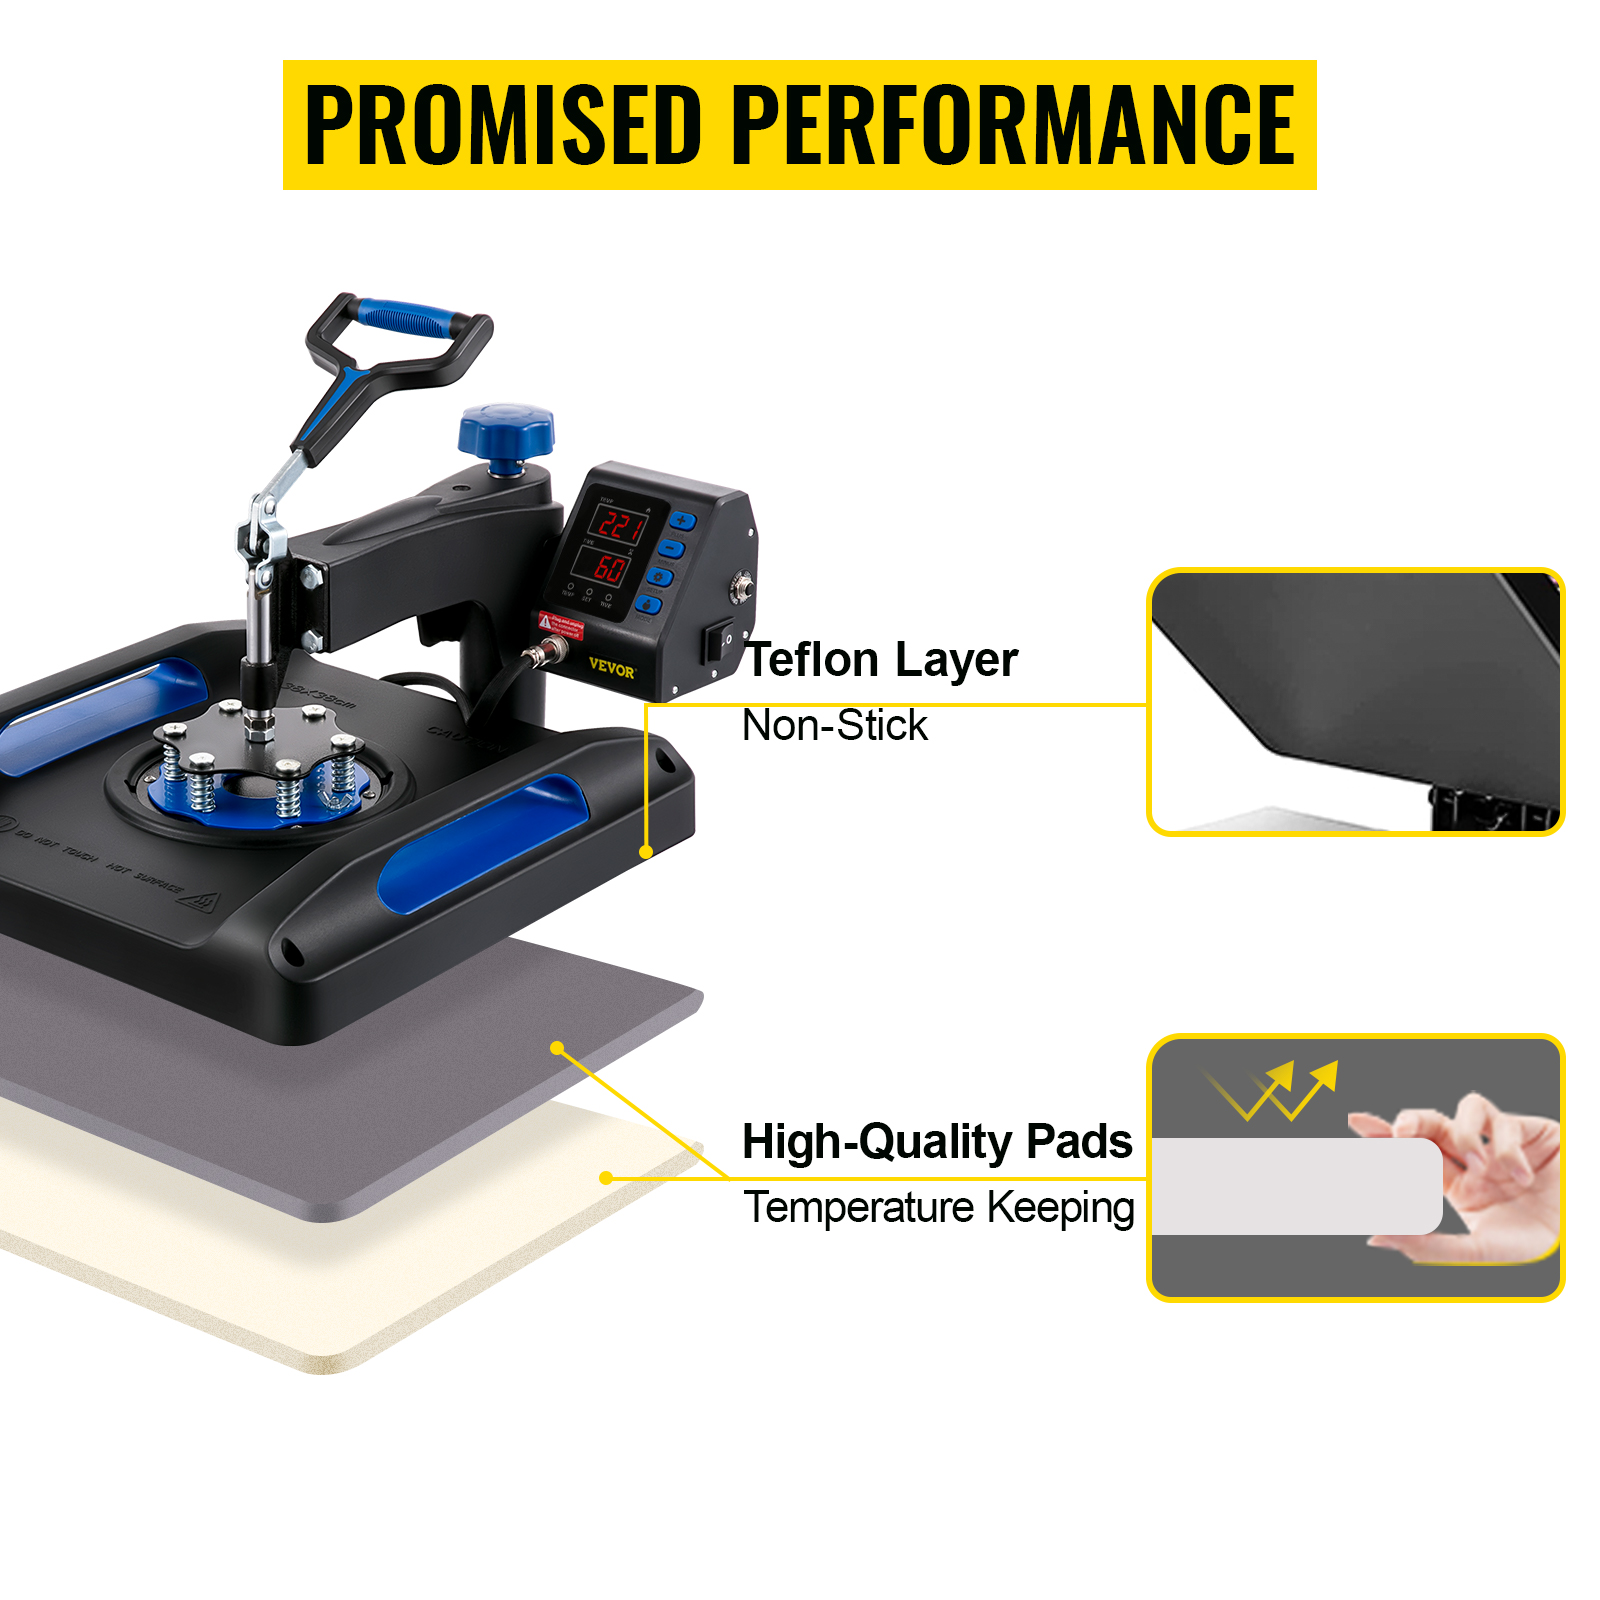 VEVOR Heat Press Machine 15 x 15 Inches Fast Heating 360 Swing Away Digital Sublimation T-Shirt Vinyl Transfer Printer with Anti-scald Surface